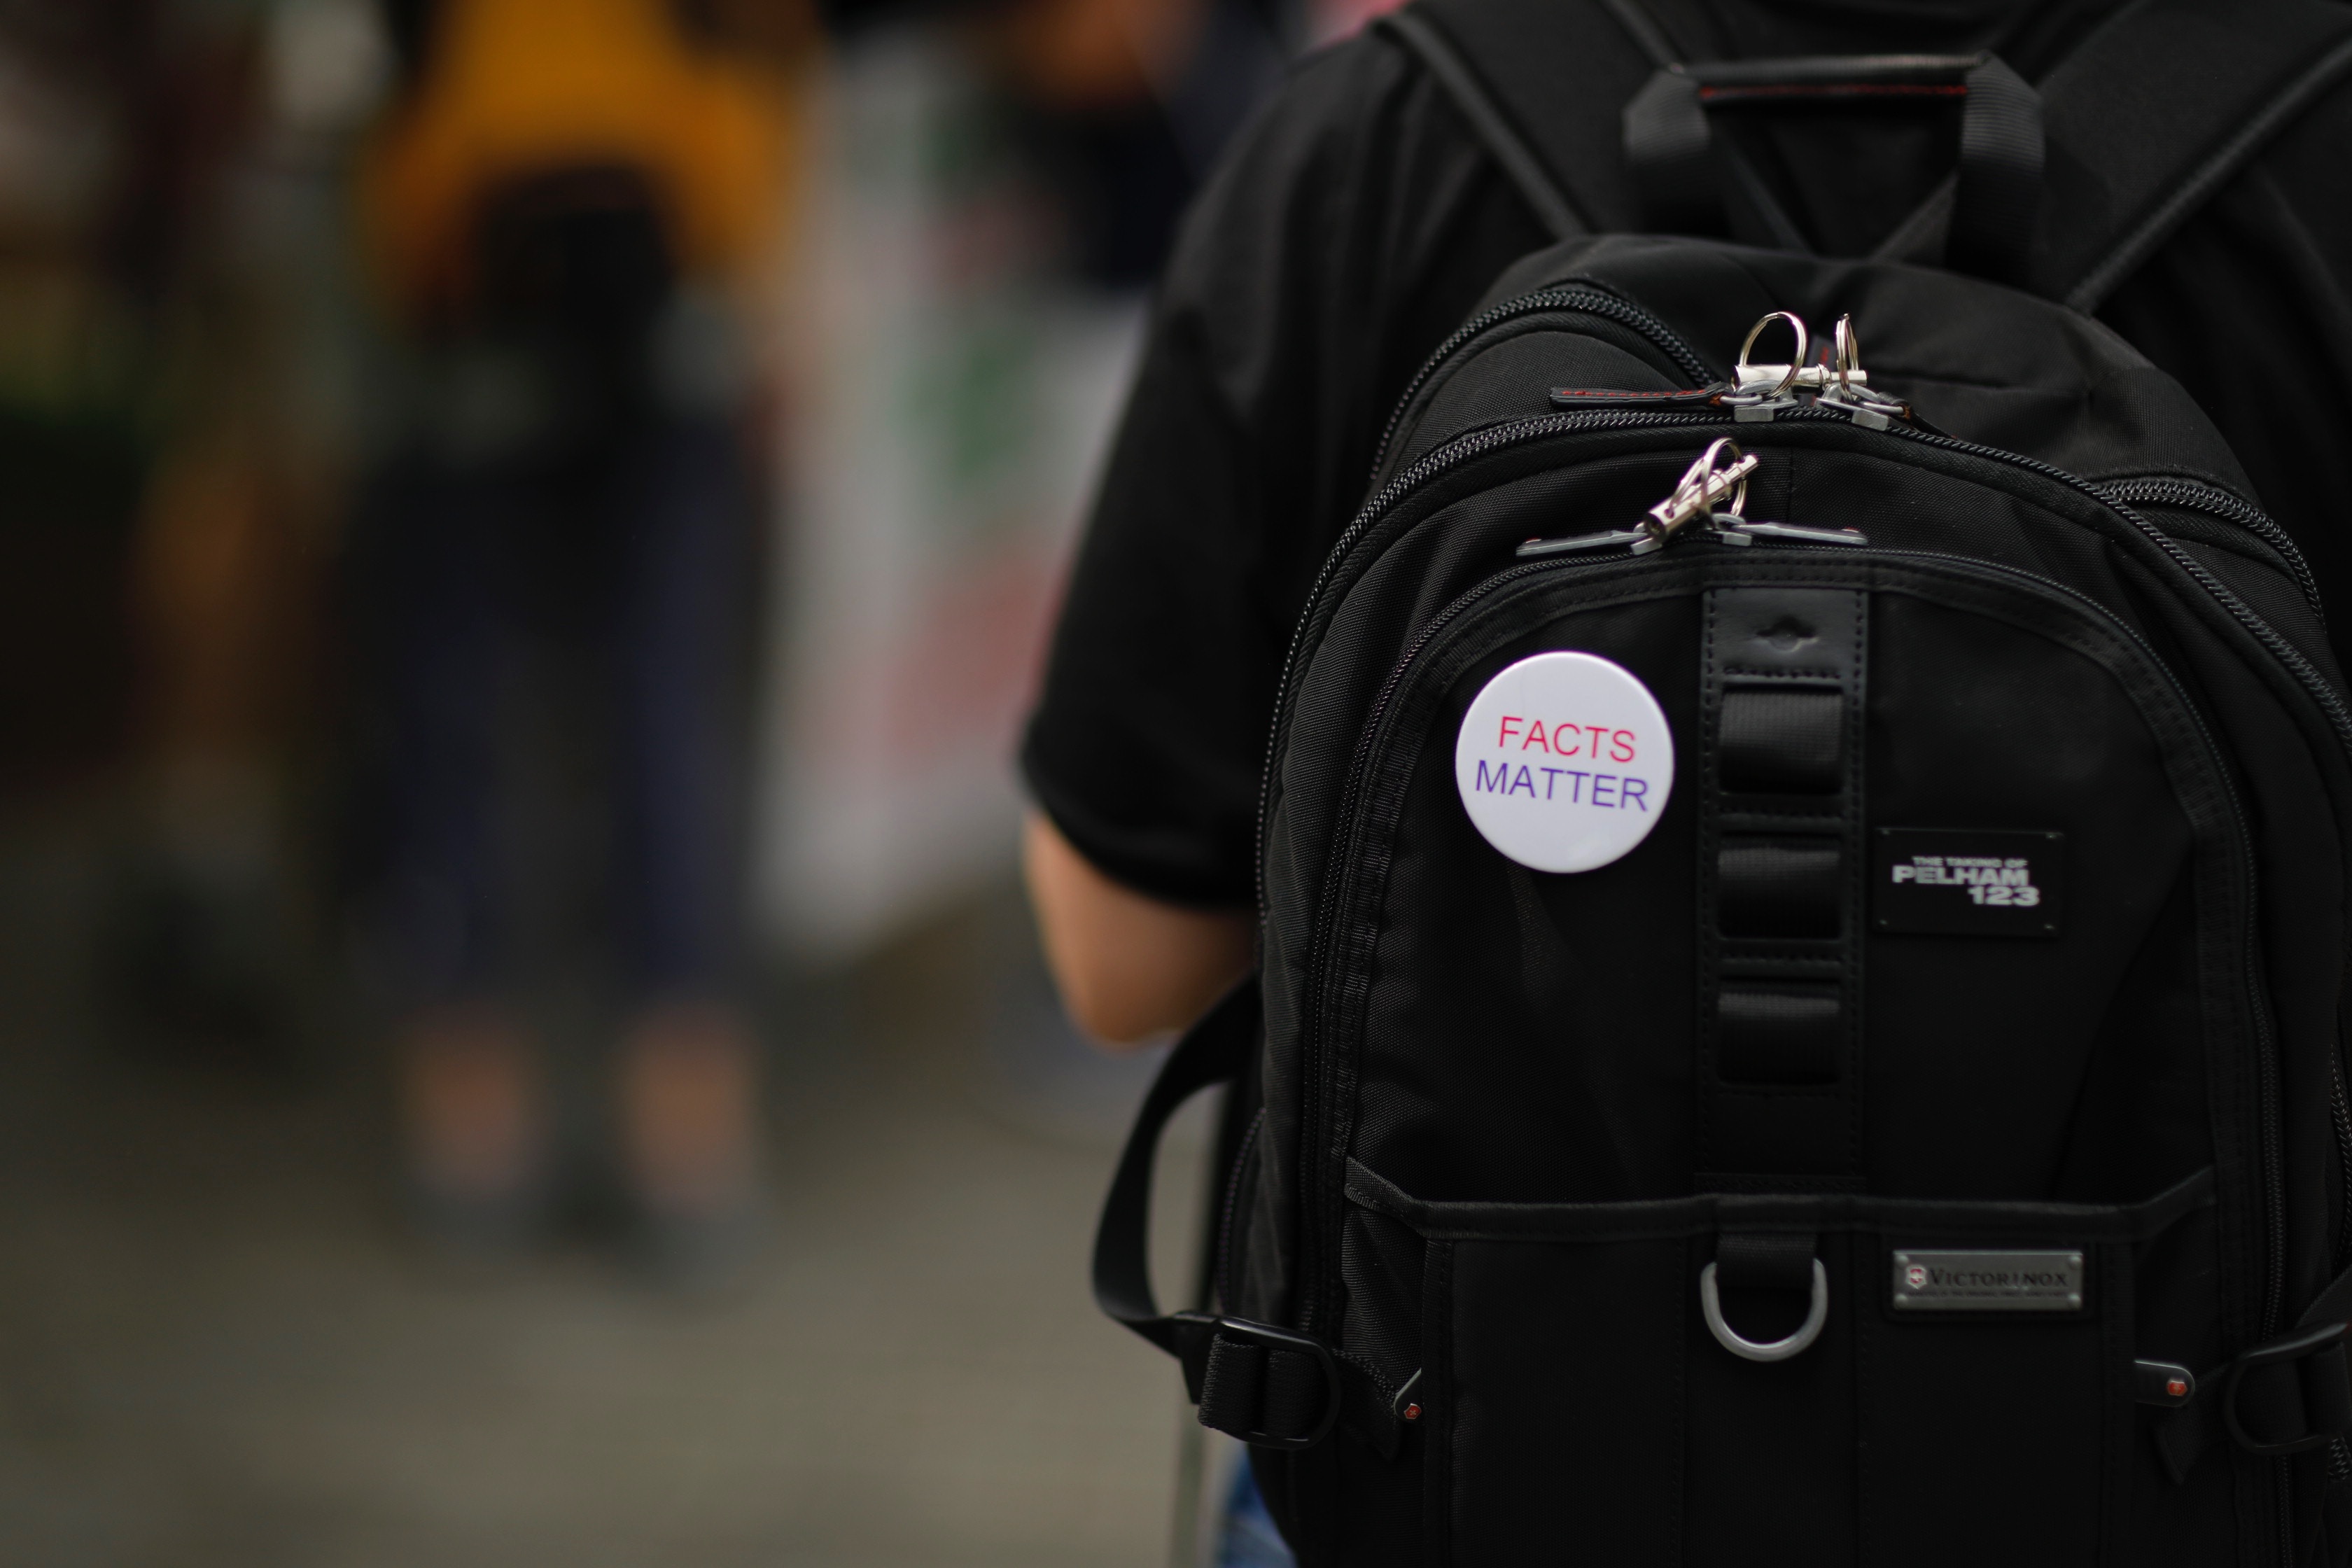 Backpack with pin on it saying "Facts Matter"